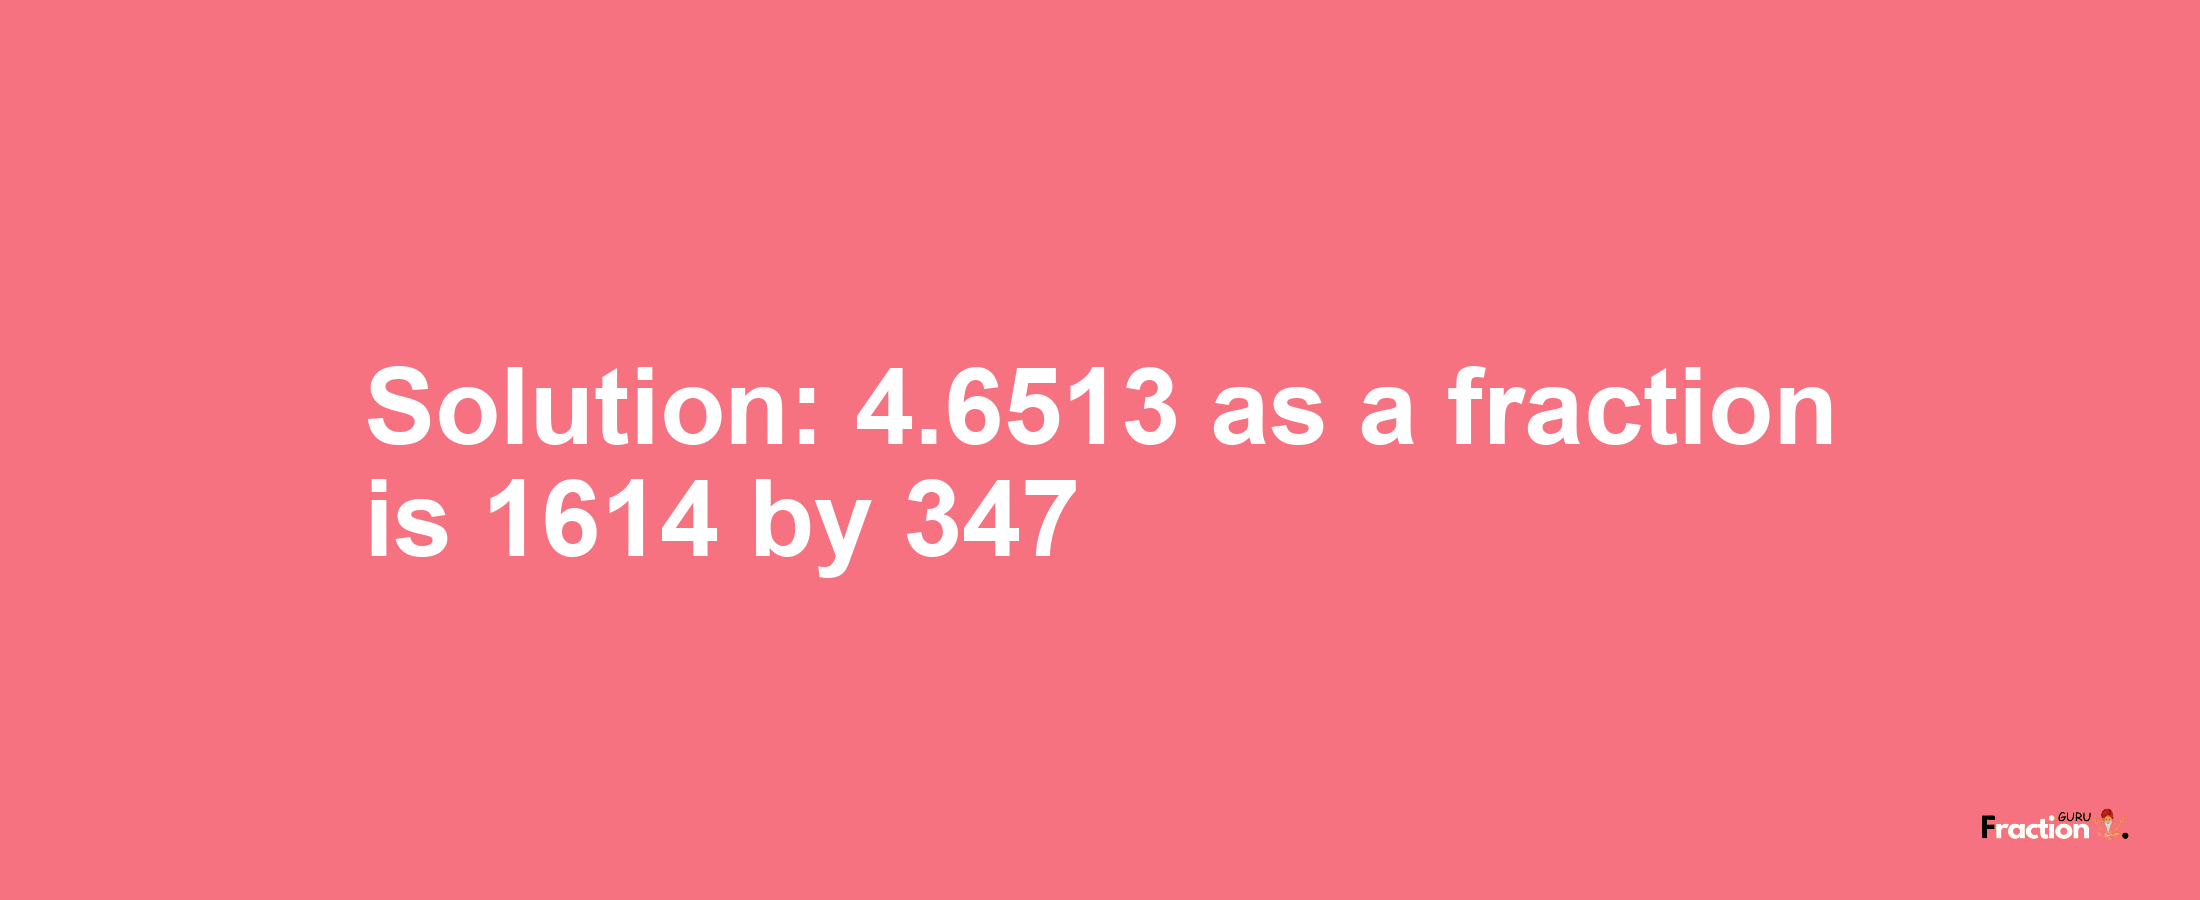 Solution:4.6513 as a fraction is 1614/347